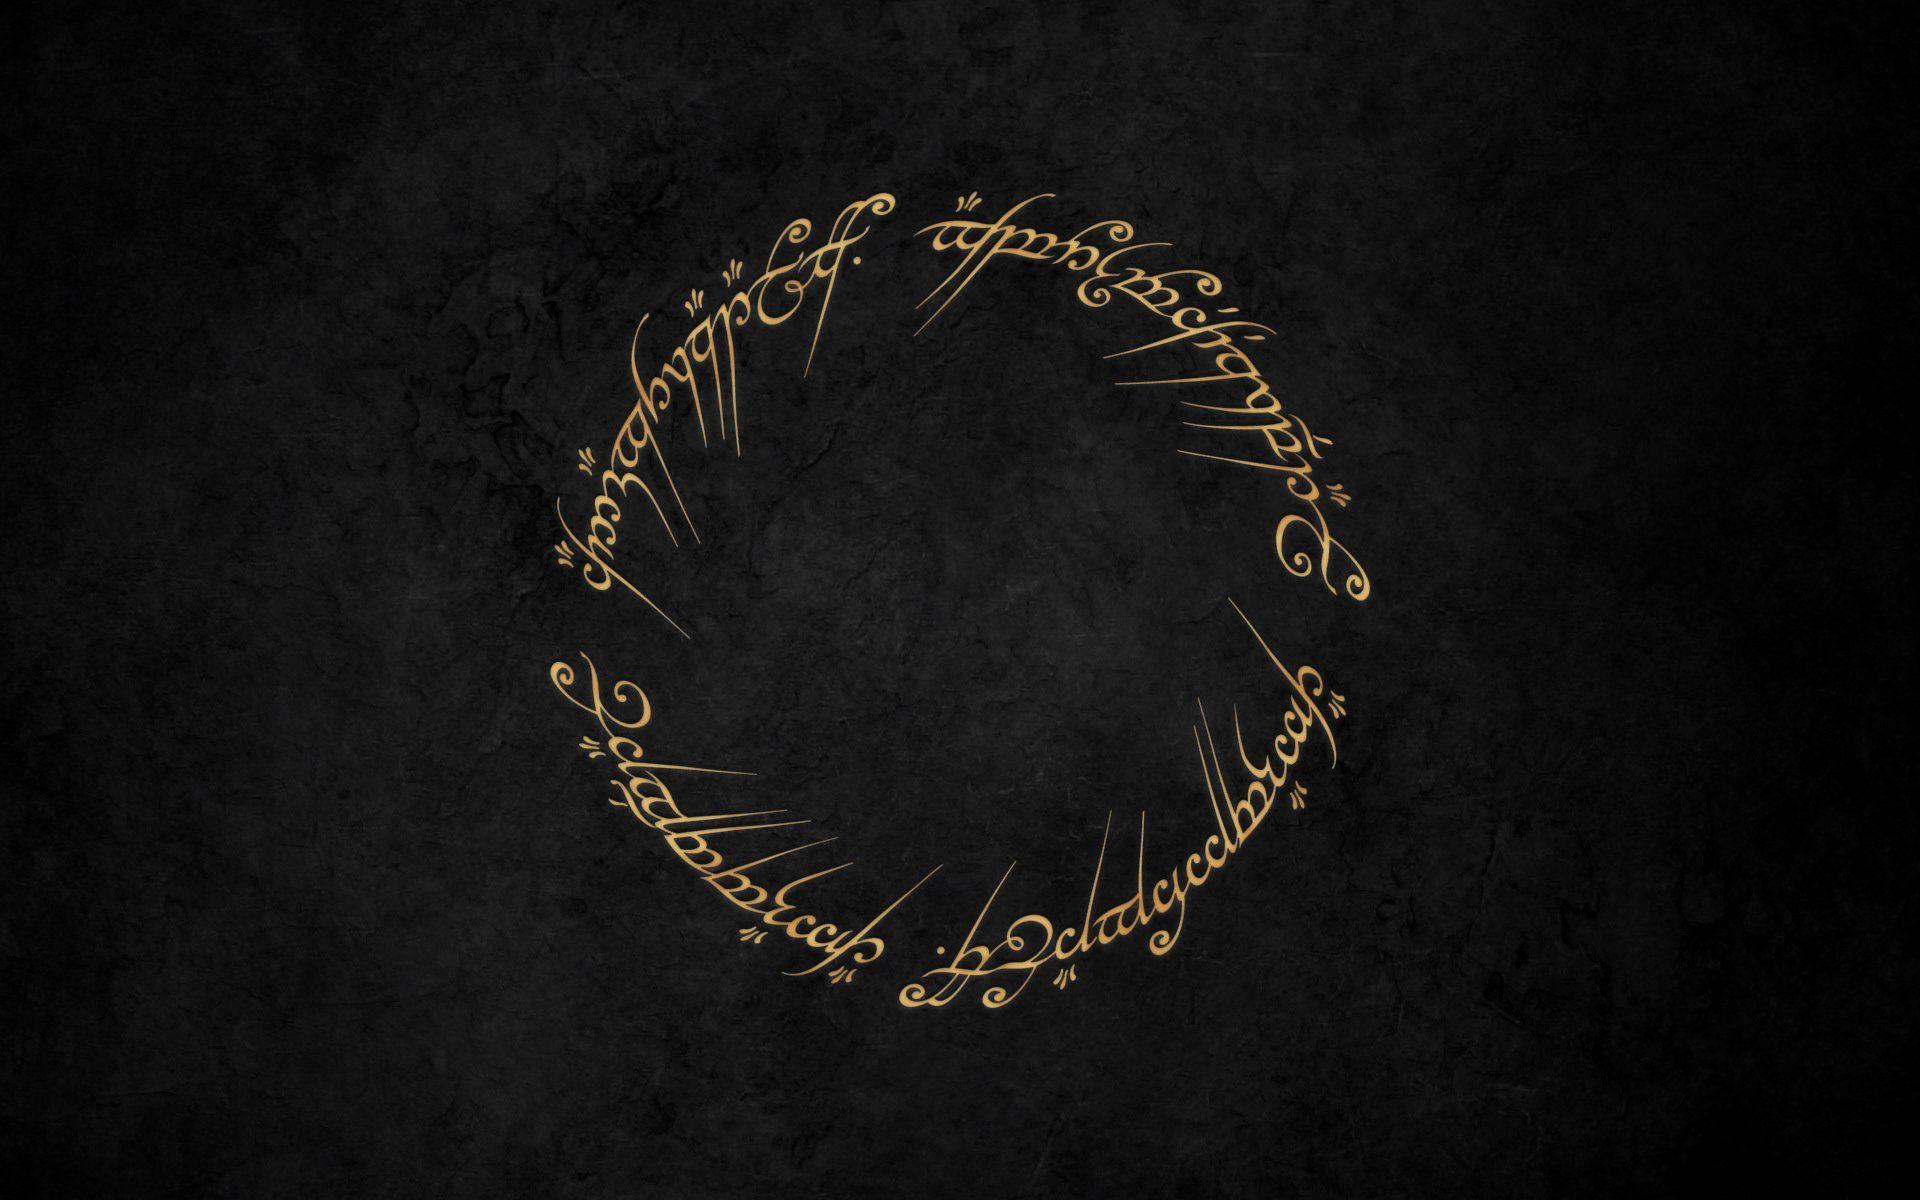 Lord of the Rings HD Wallpaper